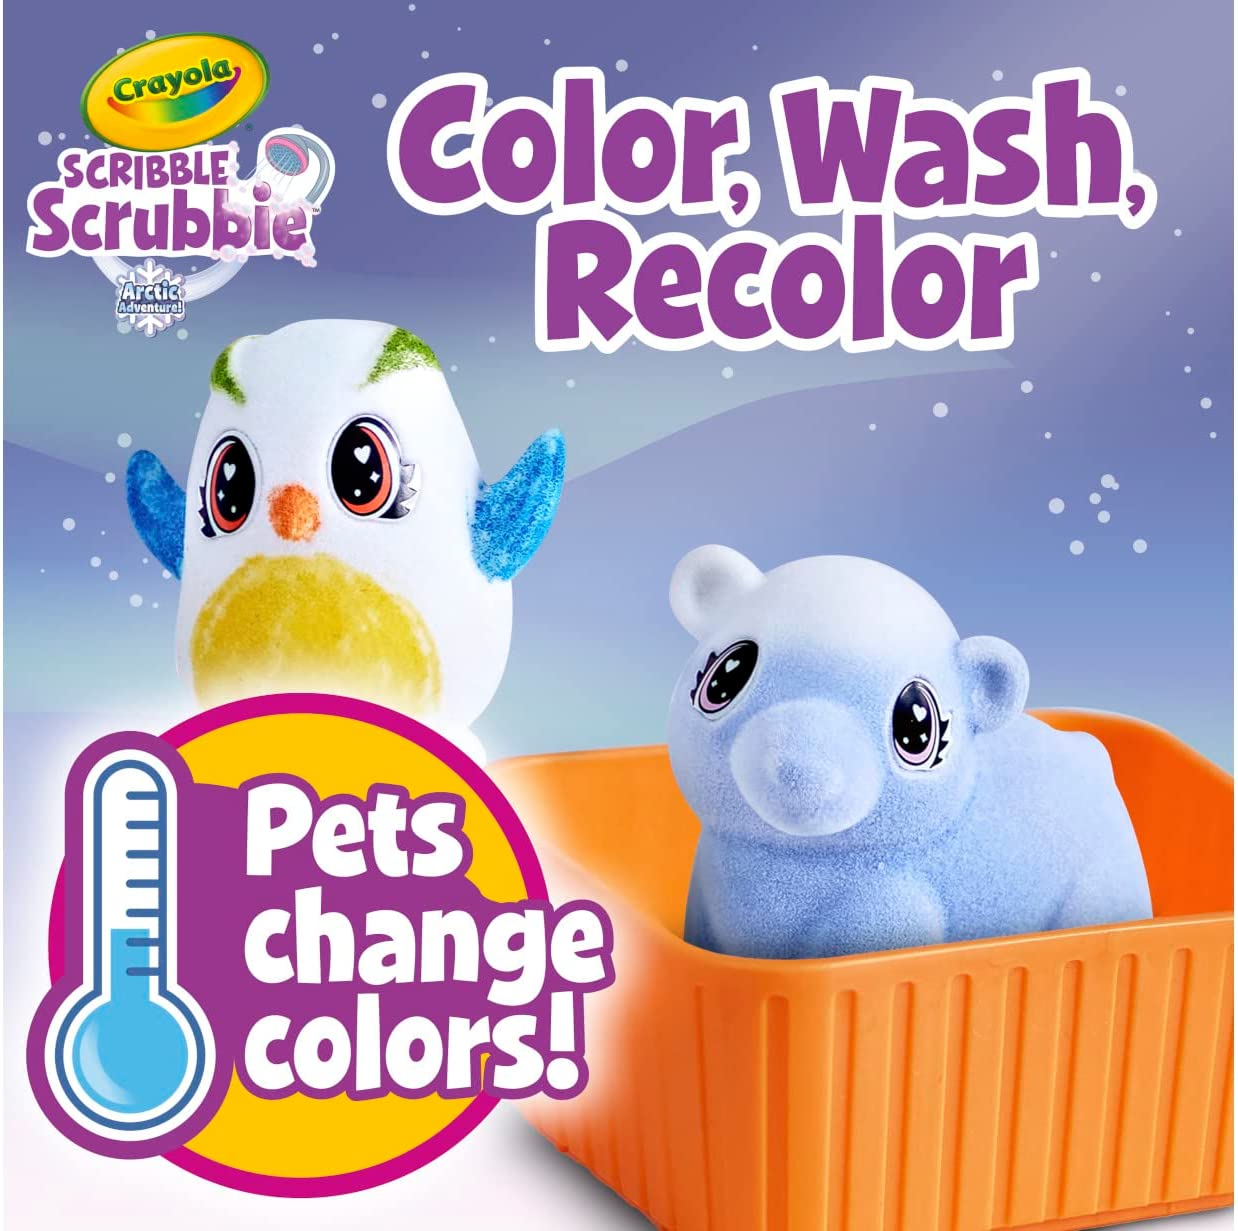 Scribble Scrubbie Pets Arctic Snow Explorer – Awesome Toys Gifts